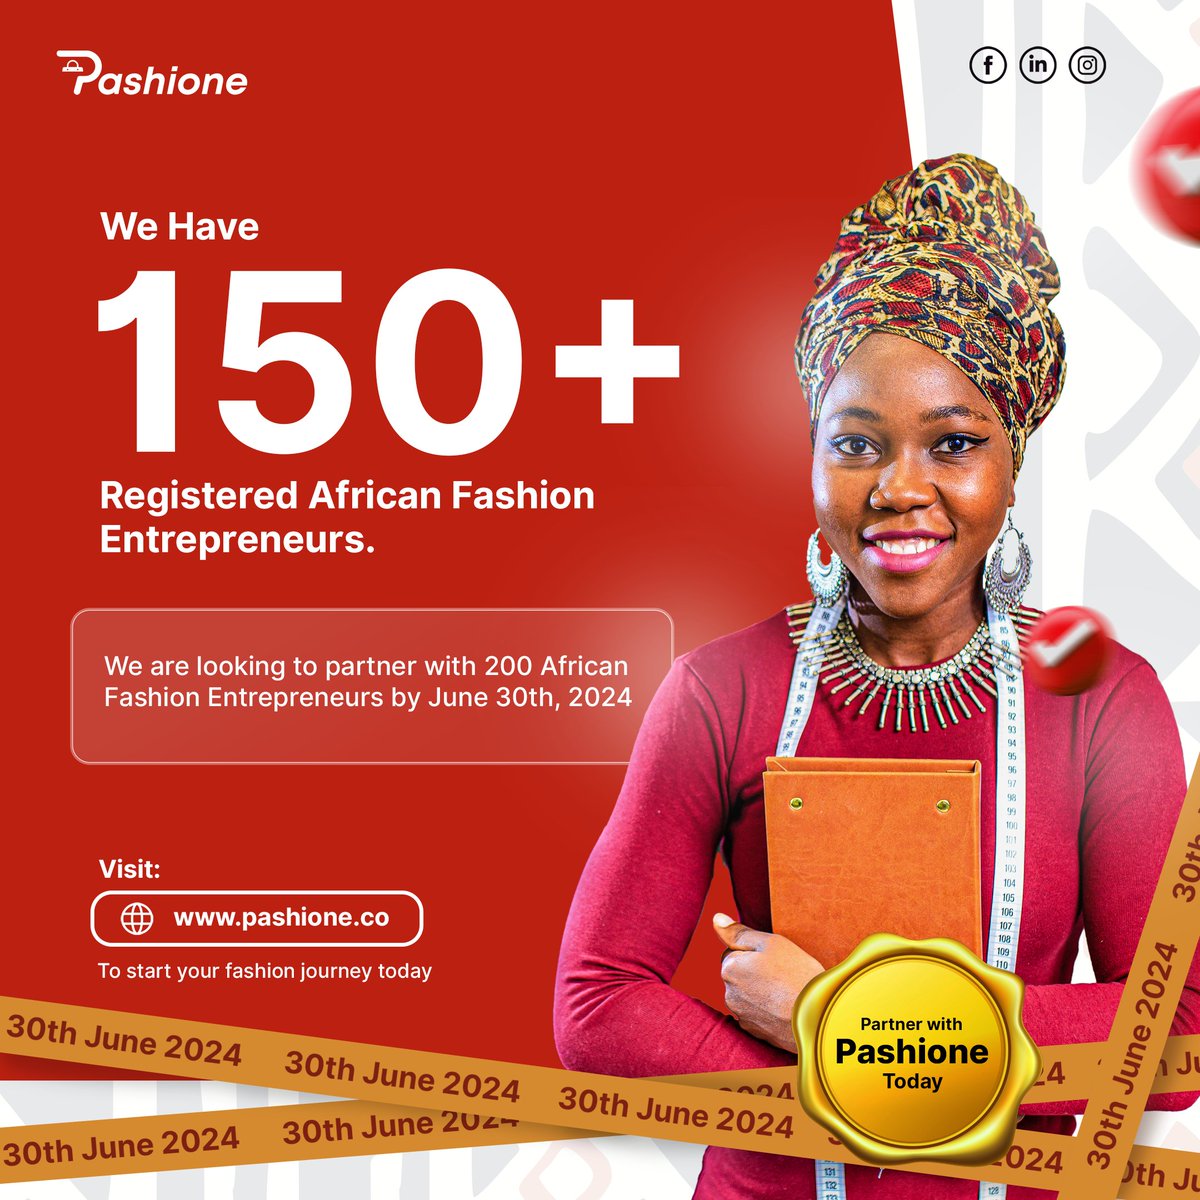 BIG THINGS ARE COOKING IN PASHIONE!

To reach your target audience and earn in dollars as an African Fashion Vendor, sign up and sell on Pashione now: storefront.pashione.co

#MichaelFasere #Pashione #AfricanFashion #LagosFashion #FashionVendor #Pashionista